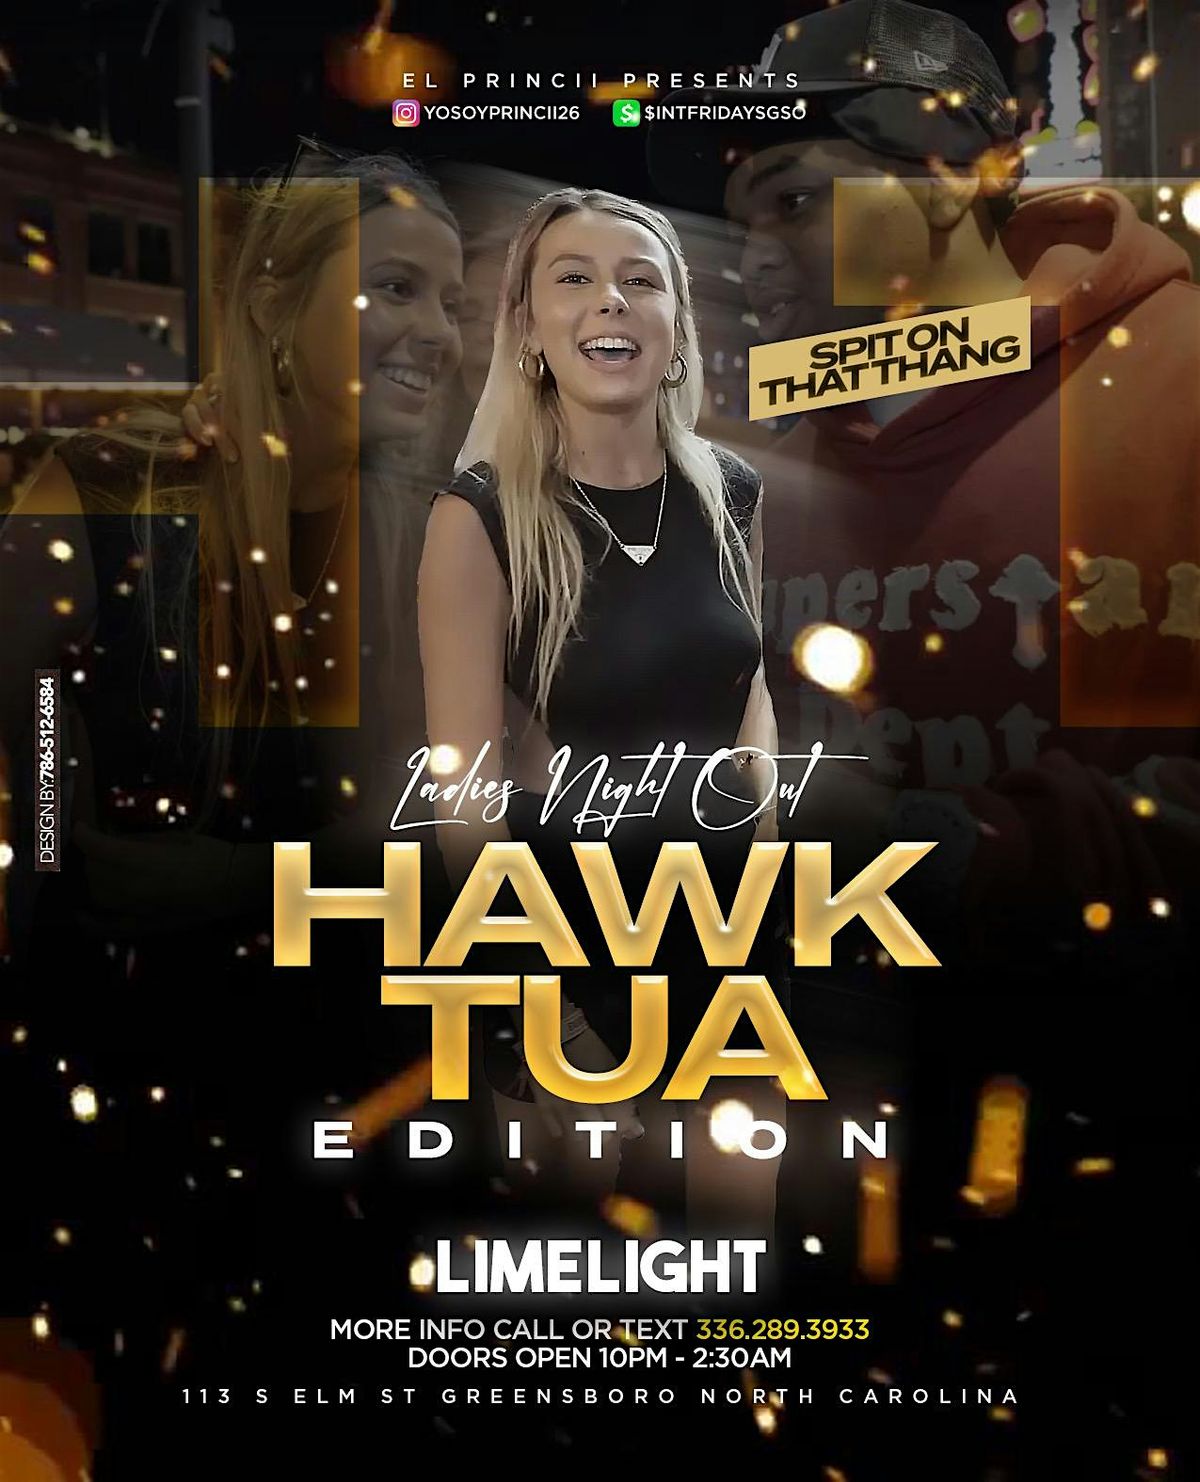 FREE TICKETS FOR LADIES NIGHT OUT \u201cHAWK TUAH\u201d EDITION AT LIMELIGHT-FRIDAY